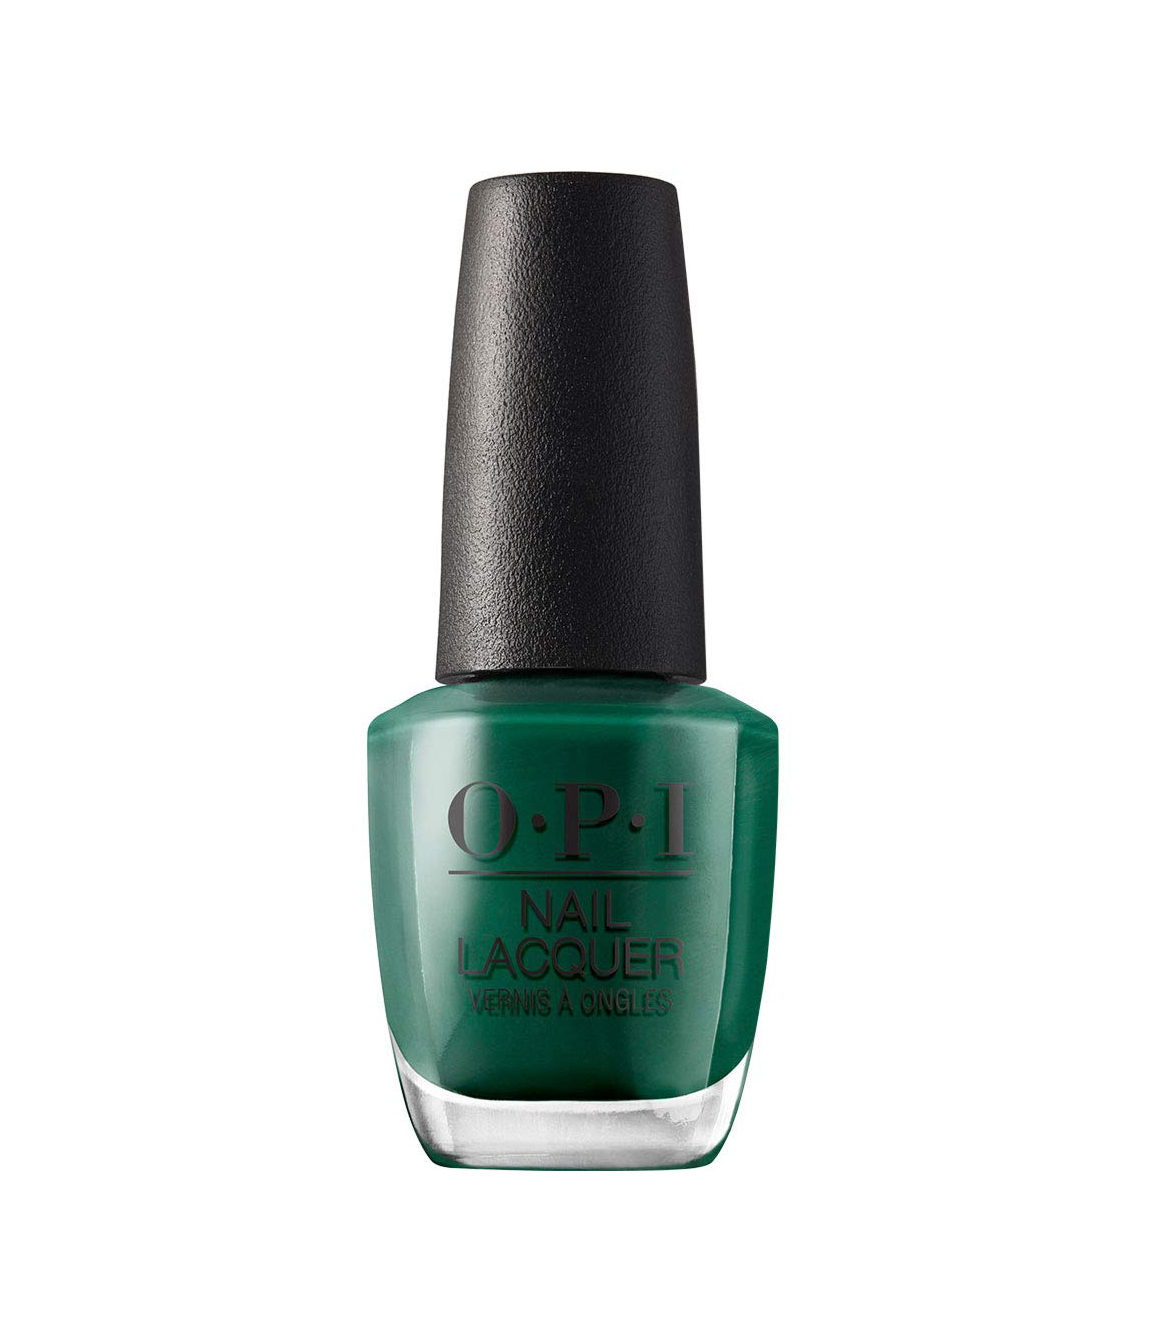 OPI Nail Lacquer in Stay Off the Lawn!!